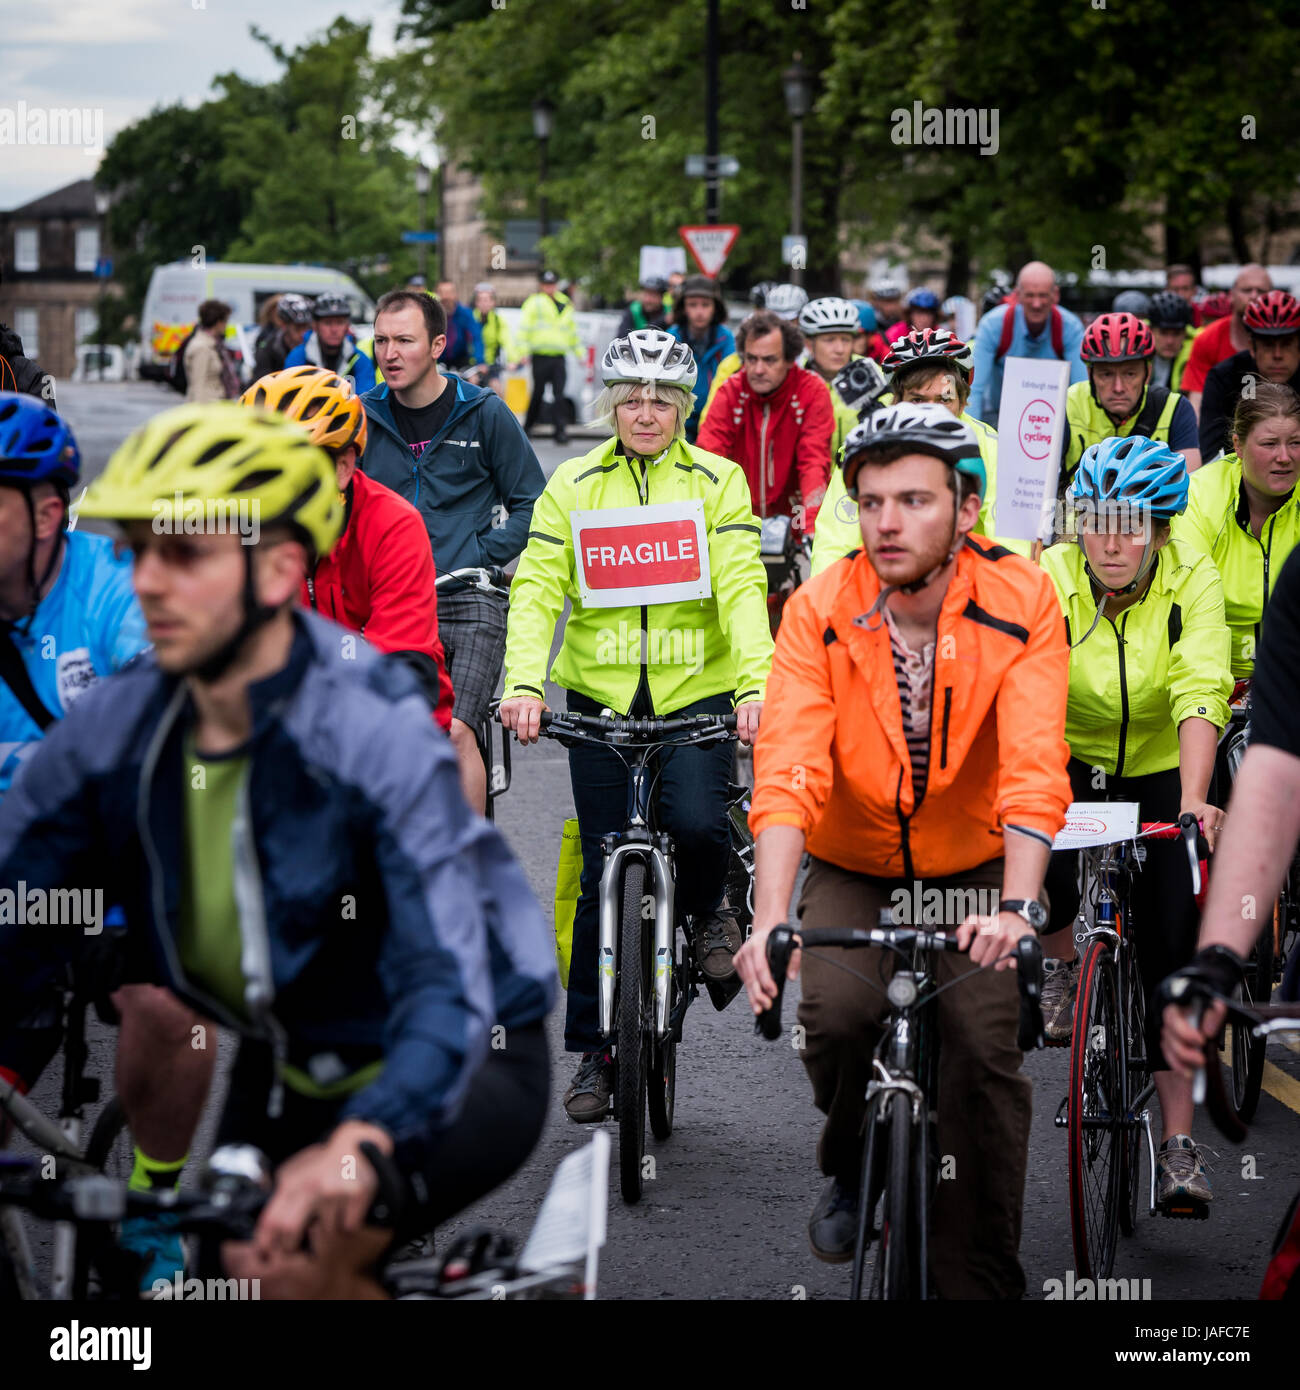 Edinburgh, UK. 7th Jun, 2017. Cyclists gathered at 8.30am on Wed 7 June 2017 in Edinburgh, Scotland, to commemorate medical student Zhi Min Soh with one minute's silence and a piper’s lament. She died one week earlier when her bike wheel got caught in the tram tracks on on Shandwick Place, Edinburgh. Credit: Andy Catlin/Alamy Live News Stock Photo